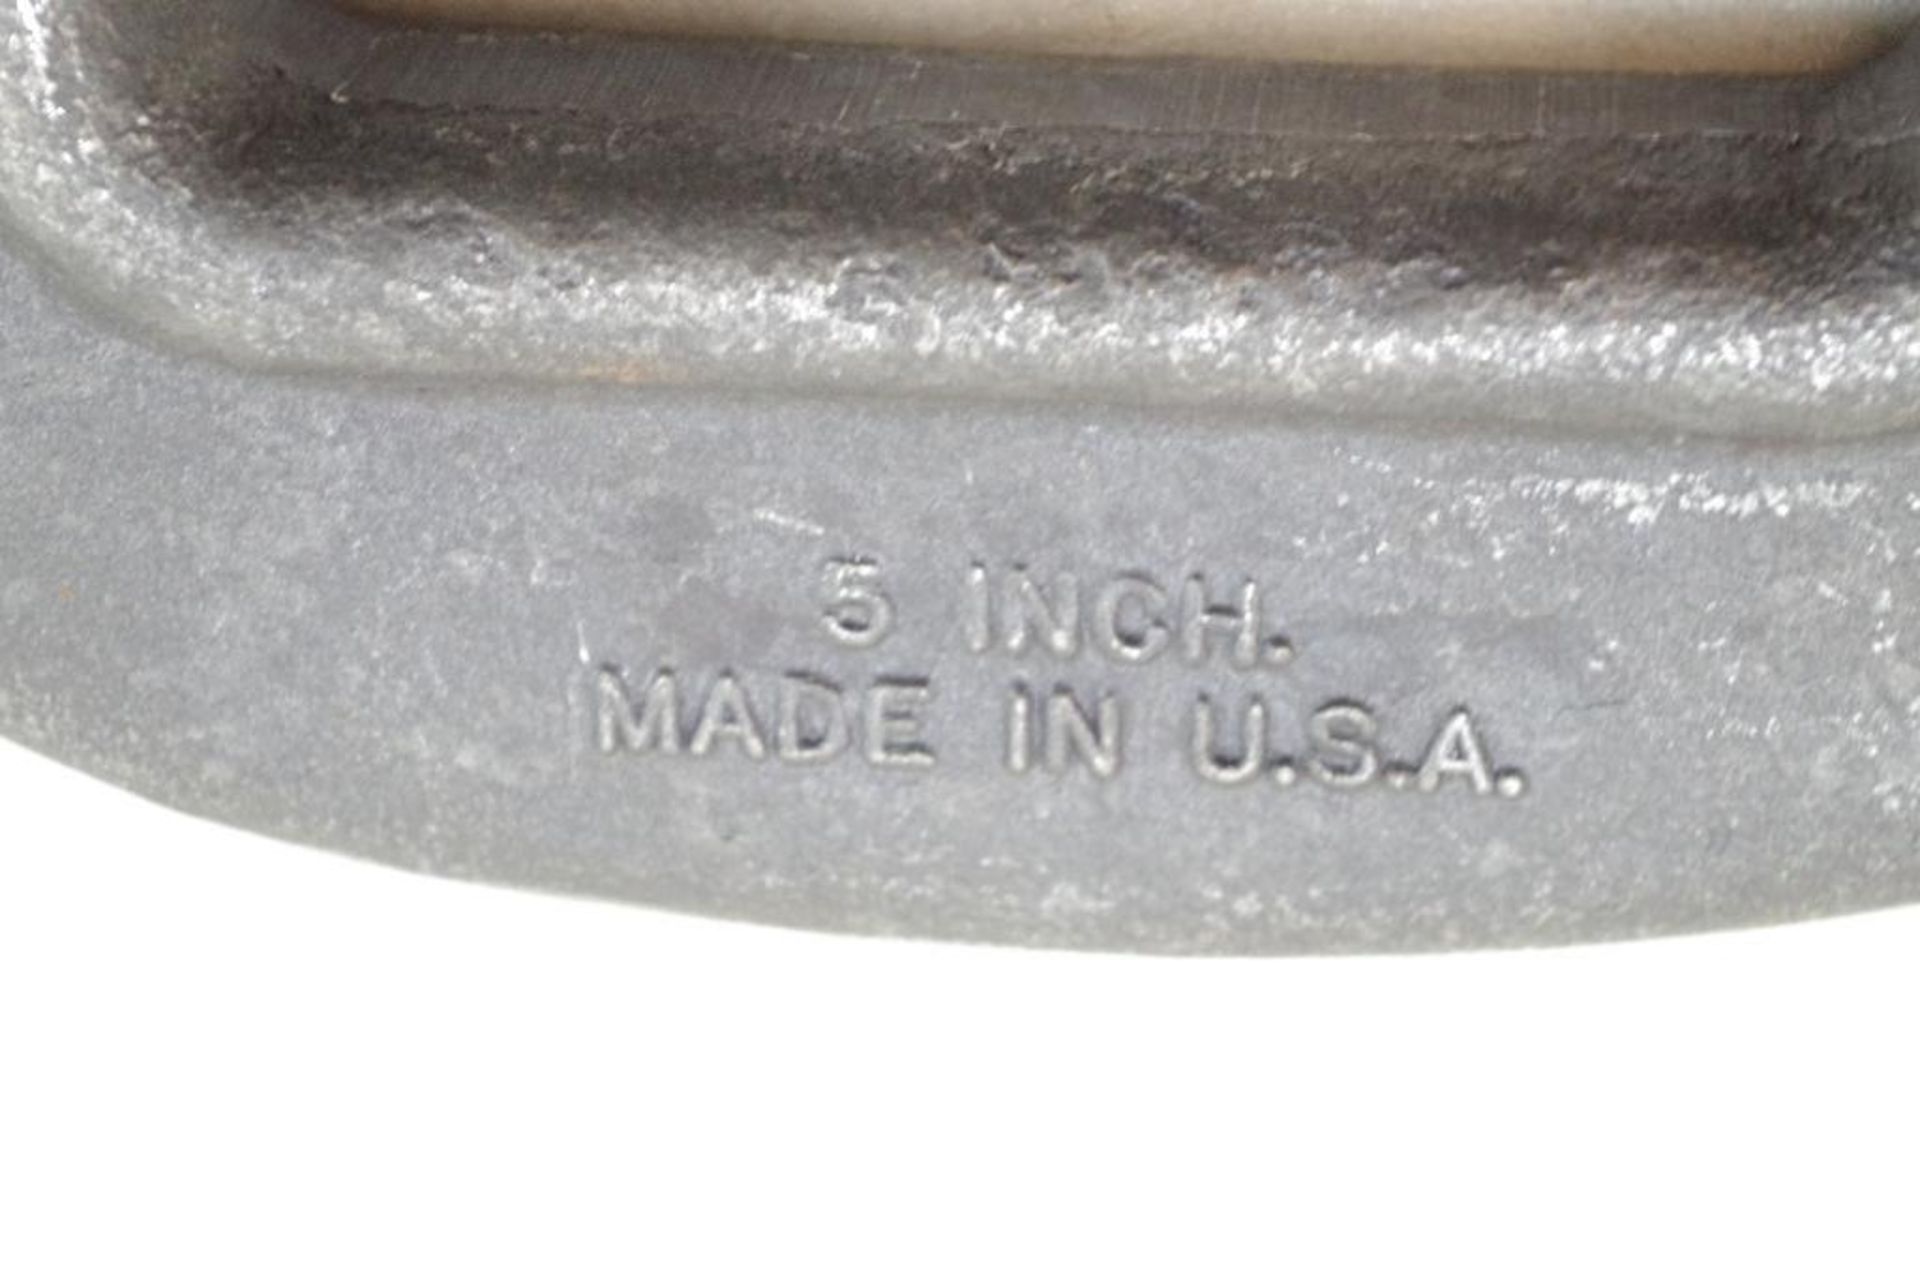 WILTON 5" C-Clamp, Made in U.S.A. - Image 2 of 3